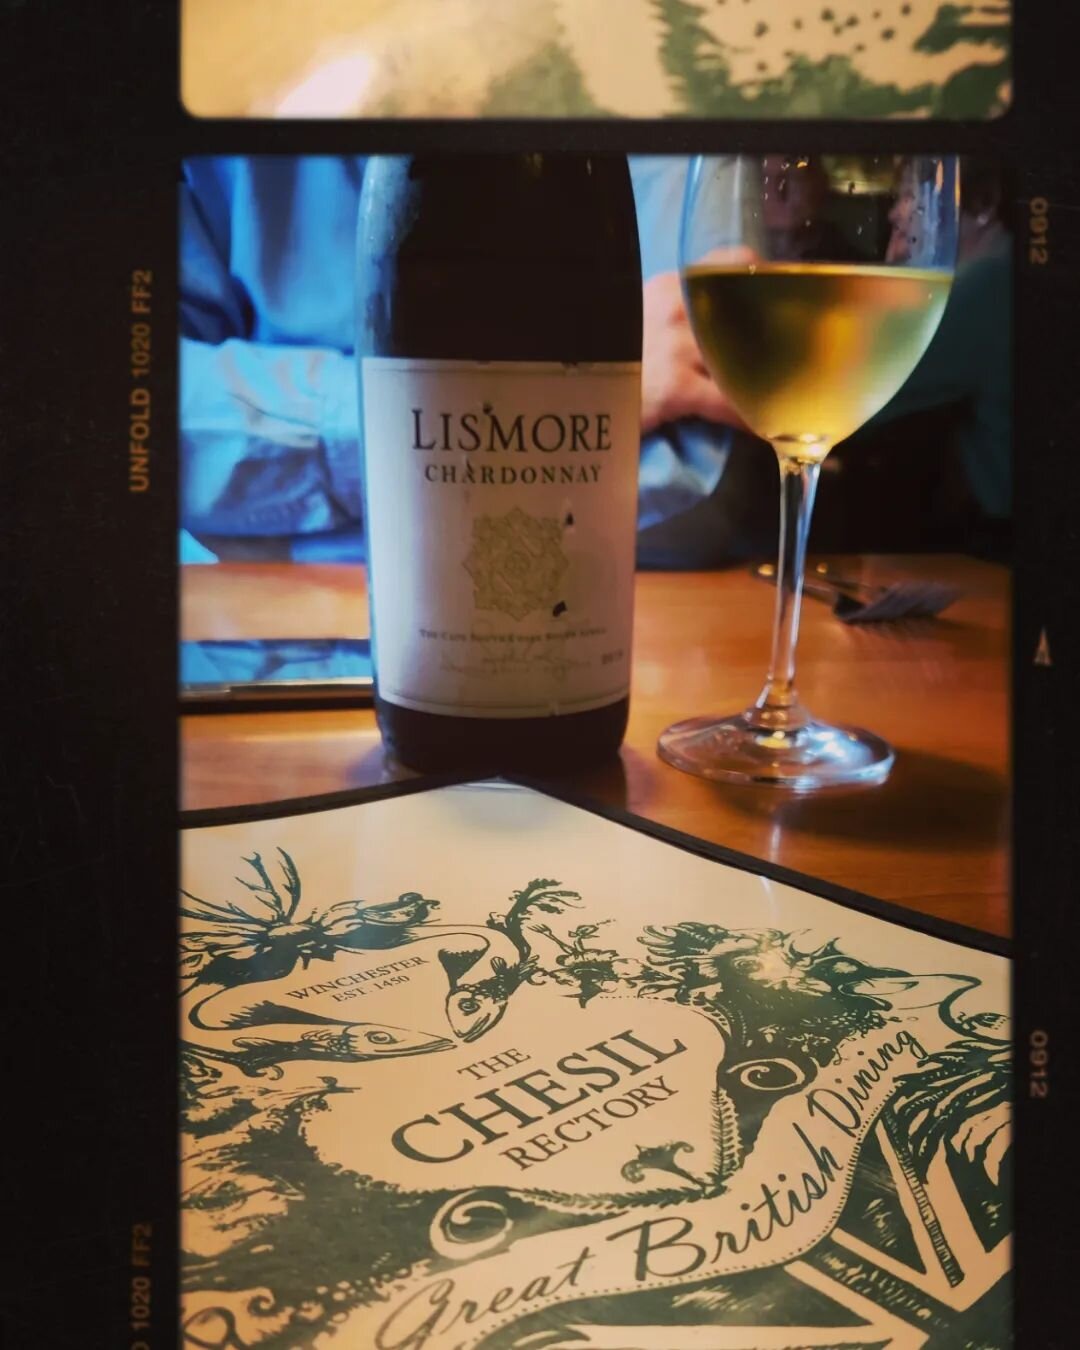 First Official day as a Brit, I know, after 25 years living in the country, it was about time. @david.leeming knows me insideout, perfect venue @chesil_rectory, exquisite food @chesilpanrattler78 and sublime wine @lismorewine recommended by @andreabe